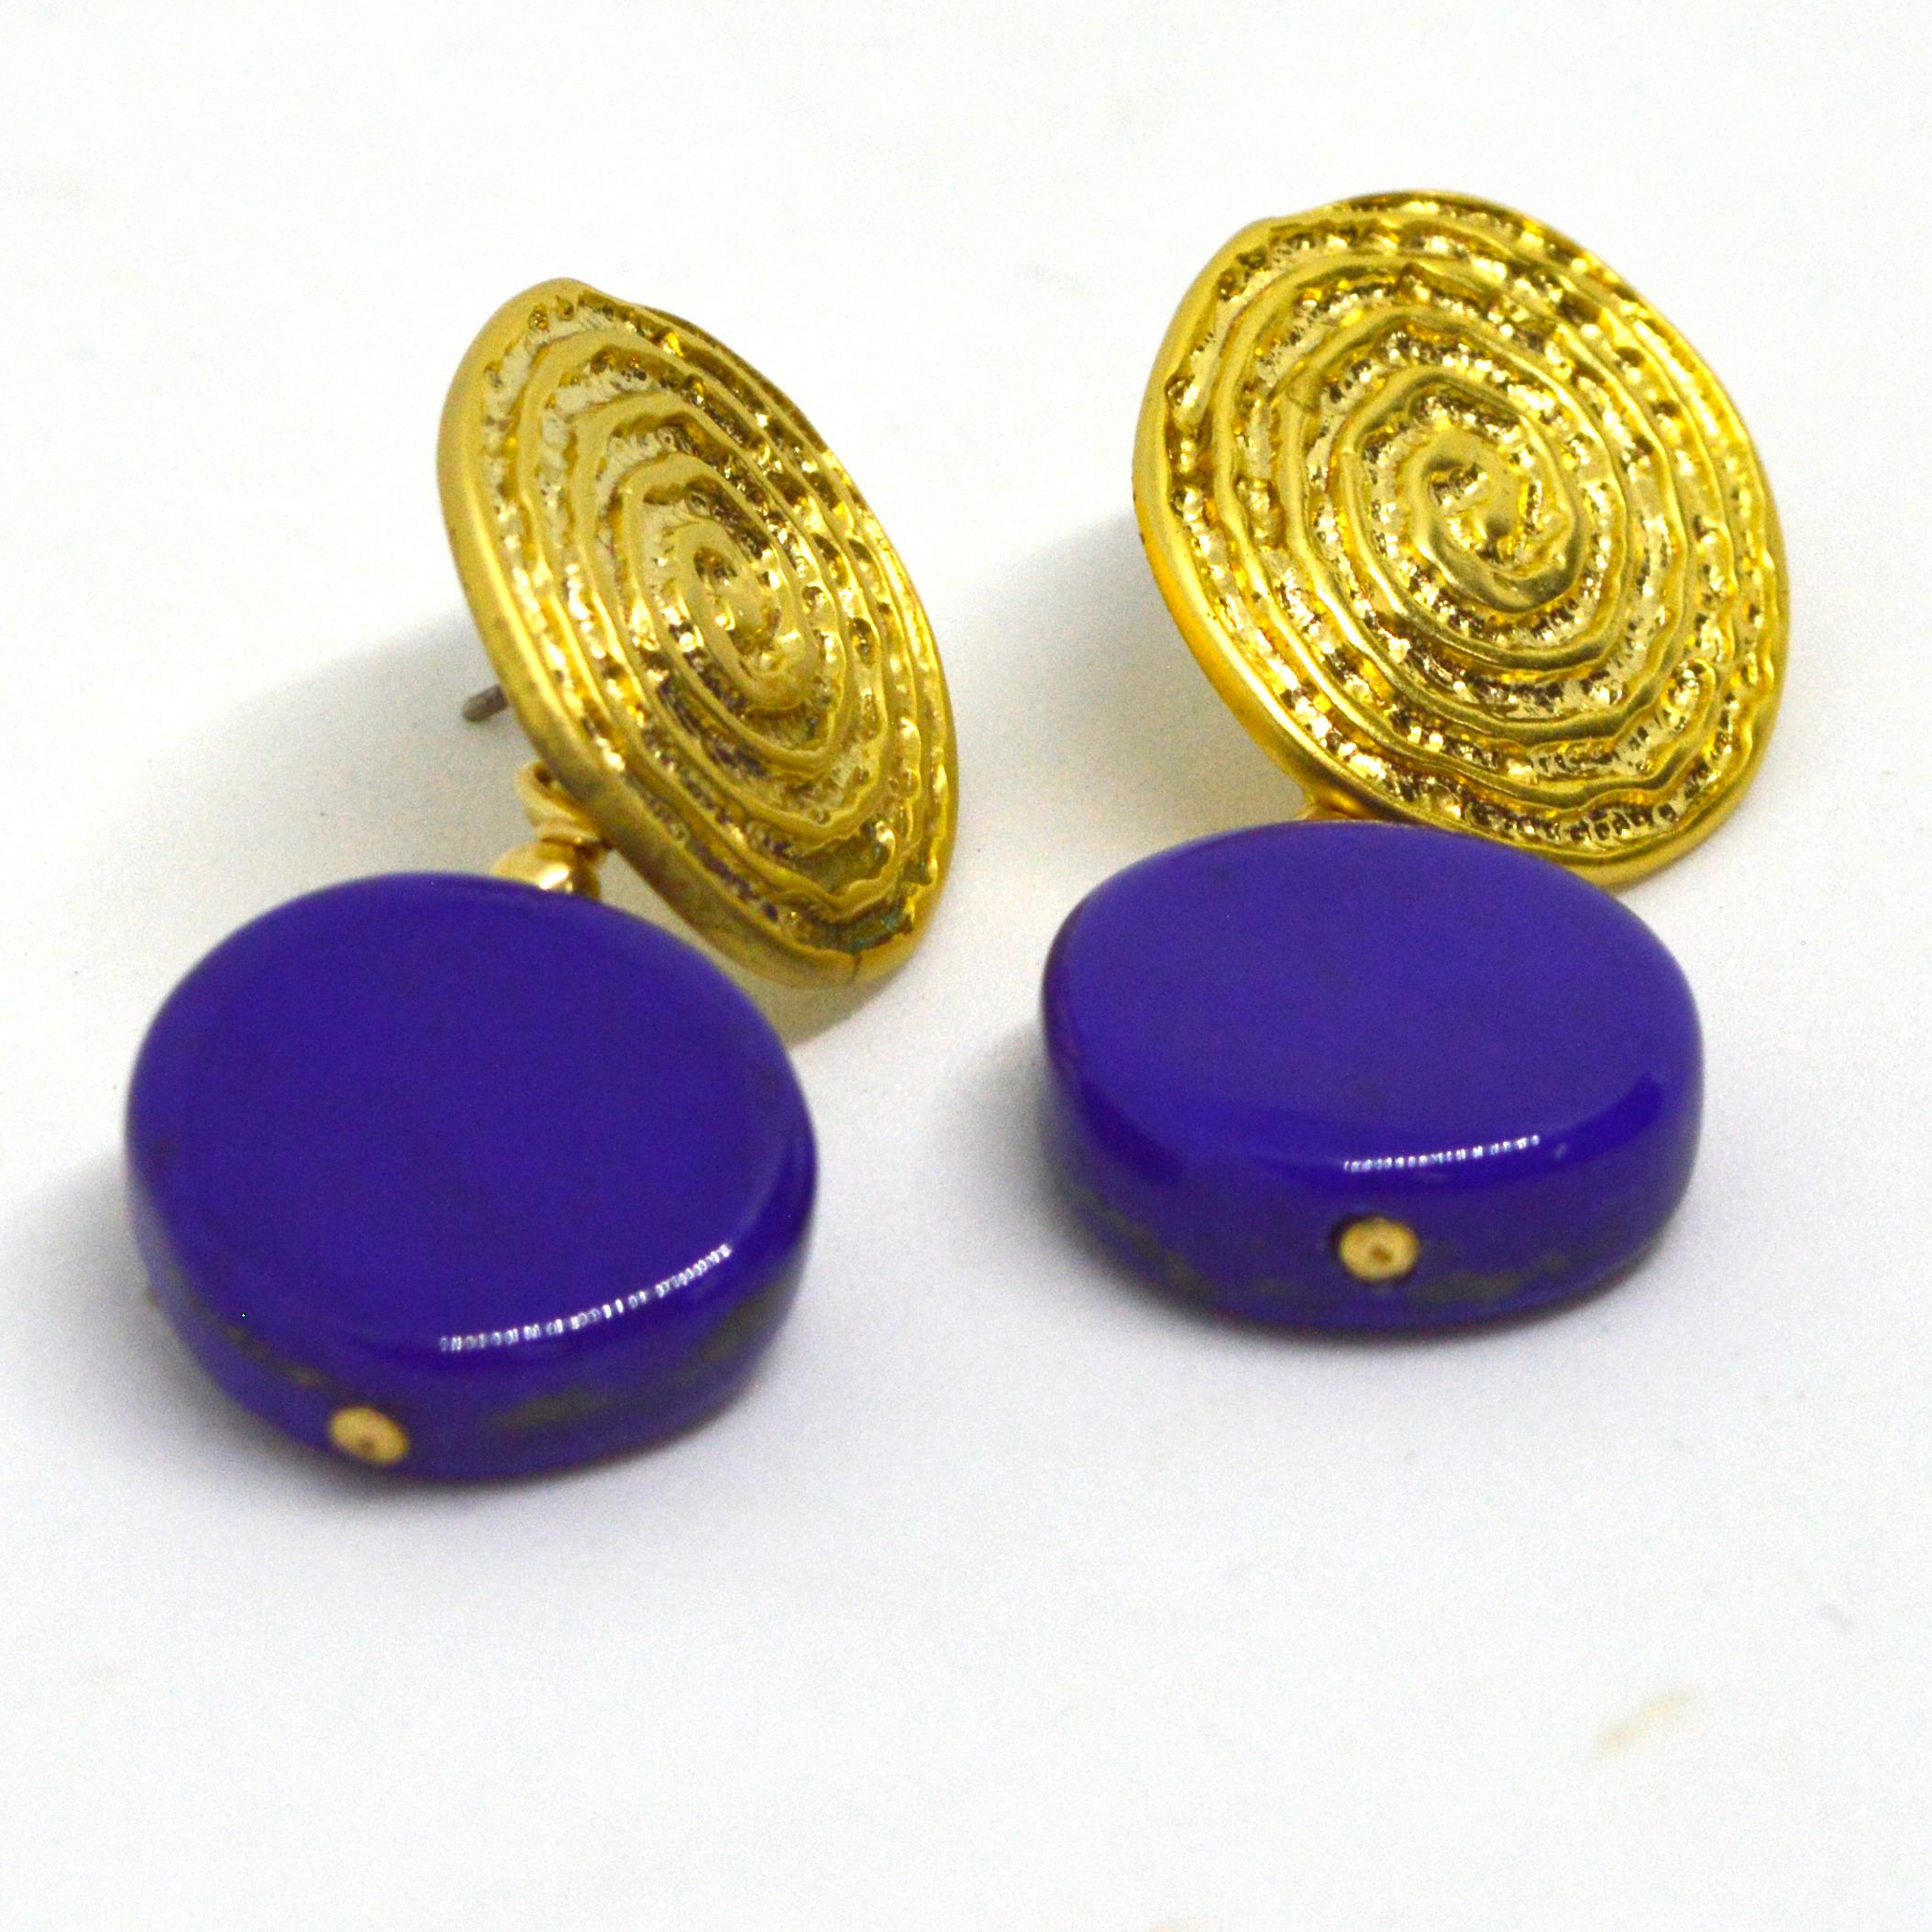 Bead Decadent Jewels Lapis Lazuli Coil Gold Stud Earrings For Sale